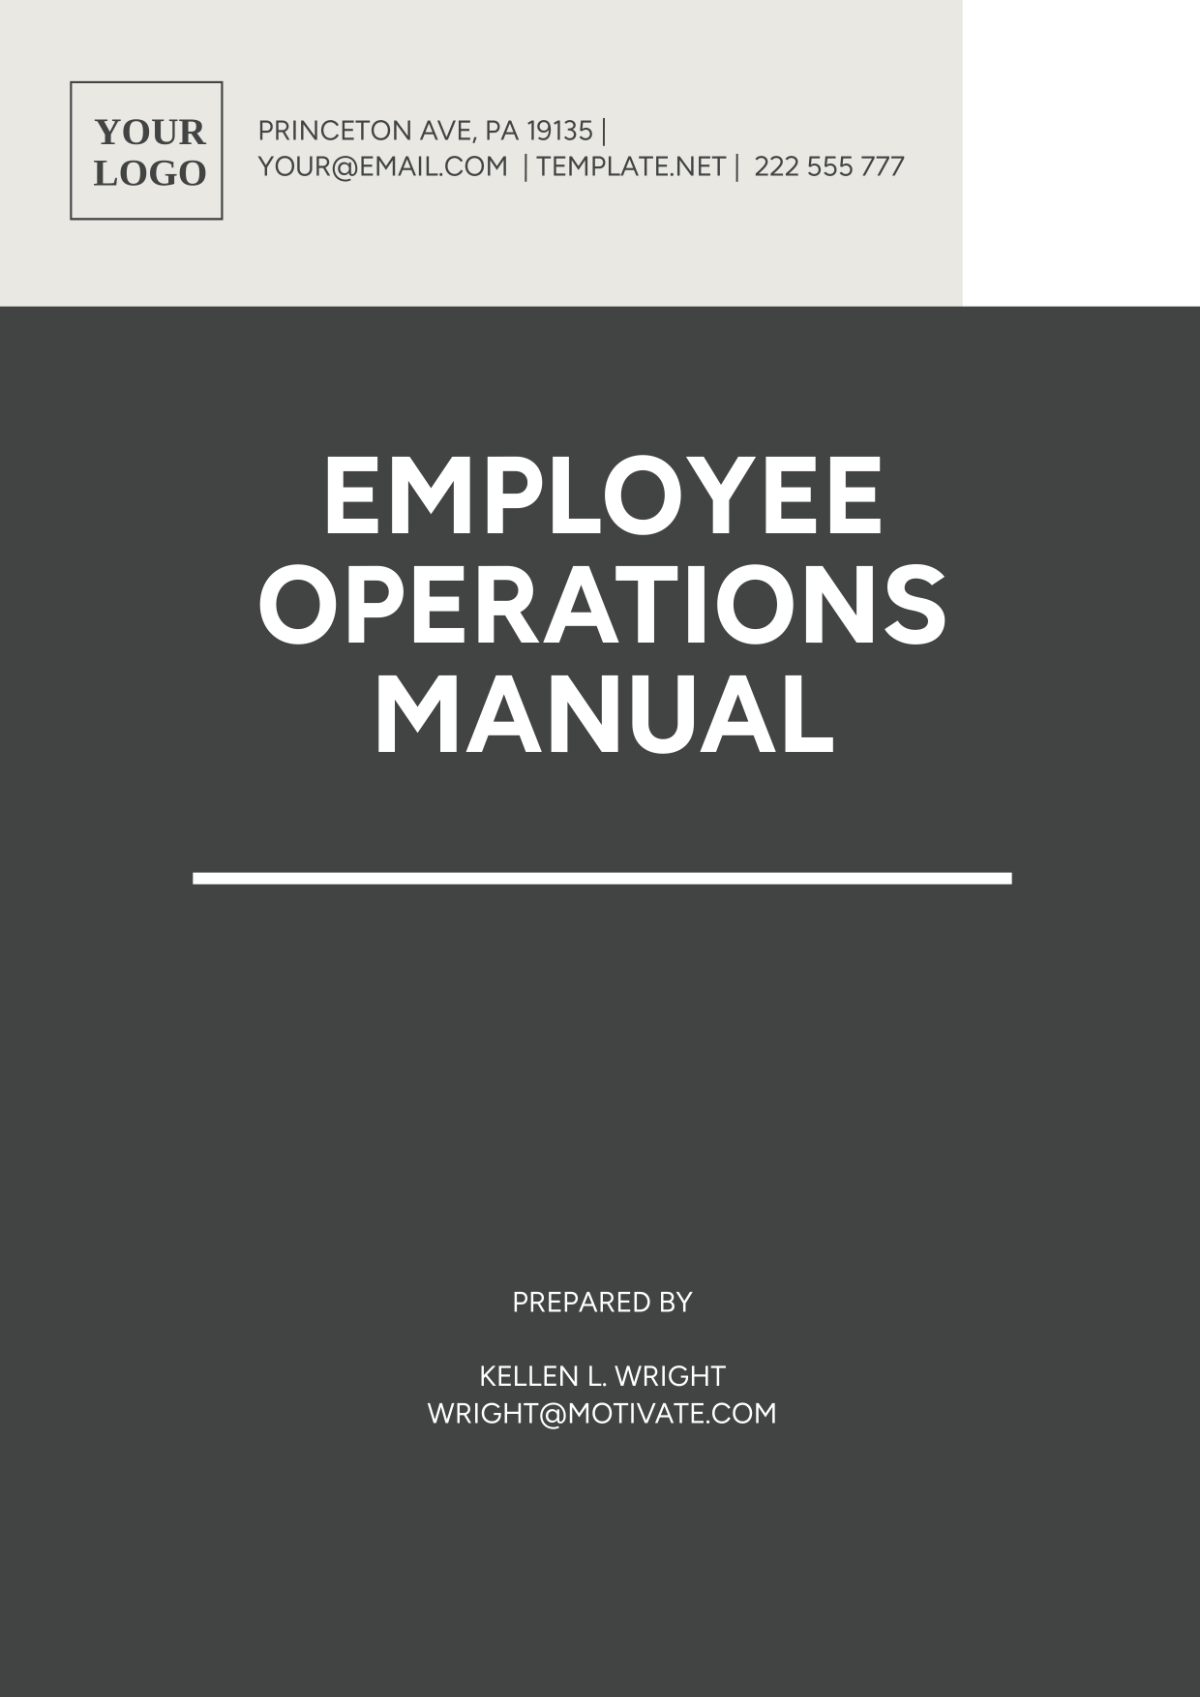 Free Employee Operations Manual Template